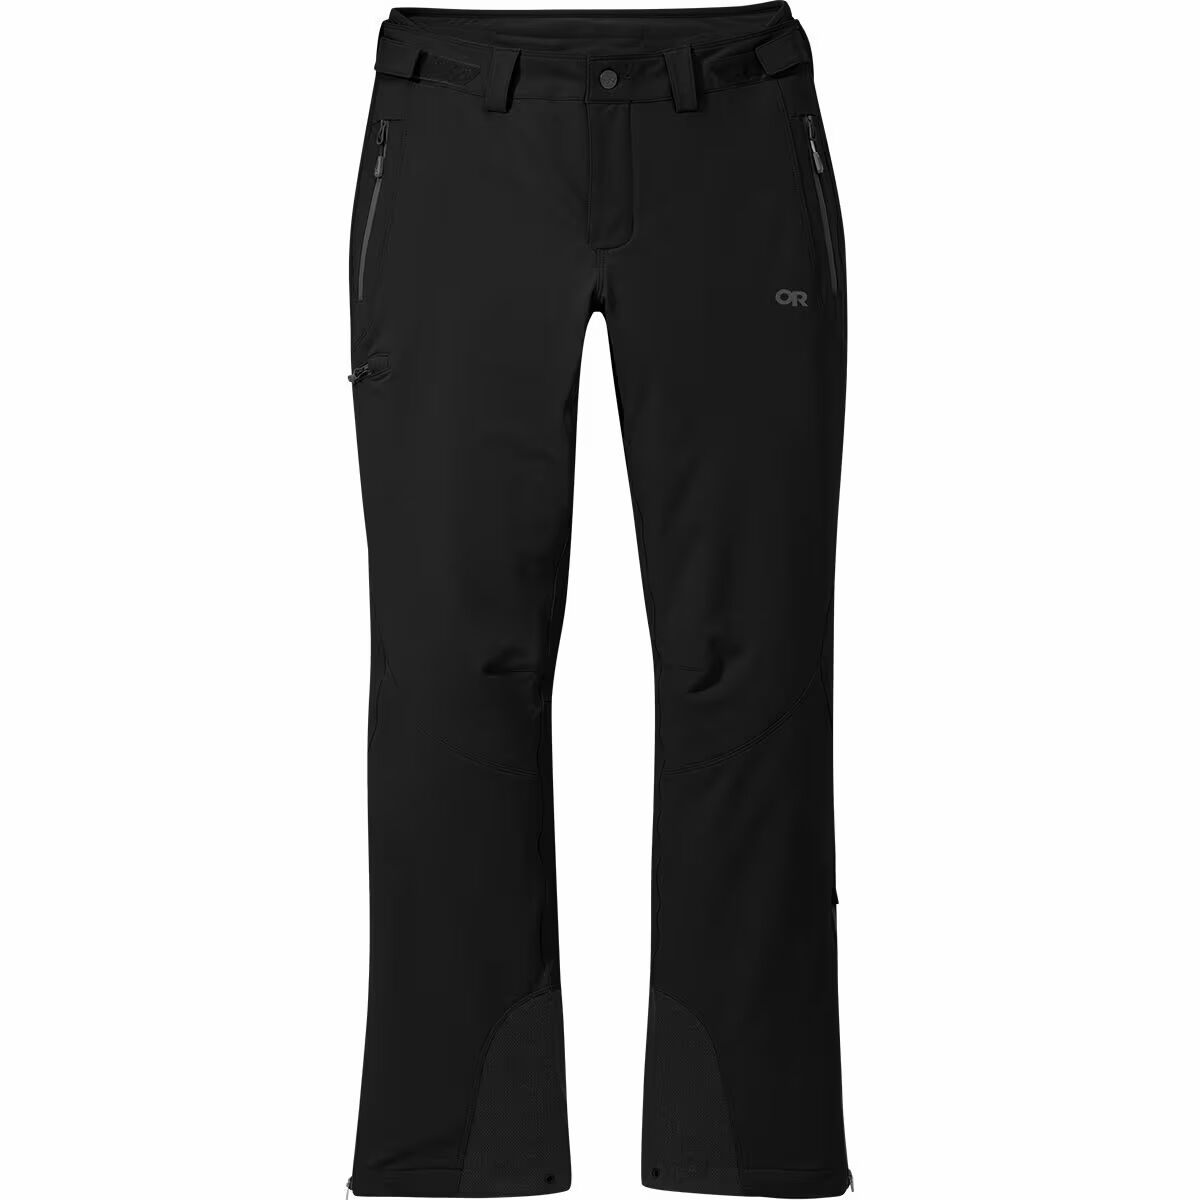 Lole Women Pants Pull On Extra Small Outdoor Hiking 29 Inseam